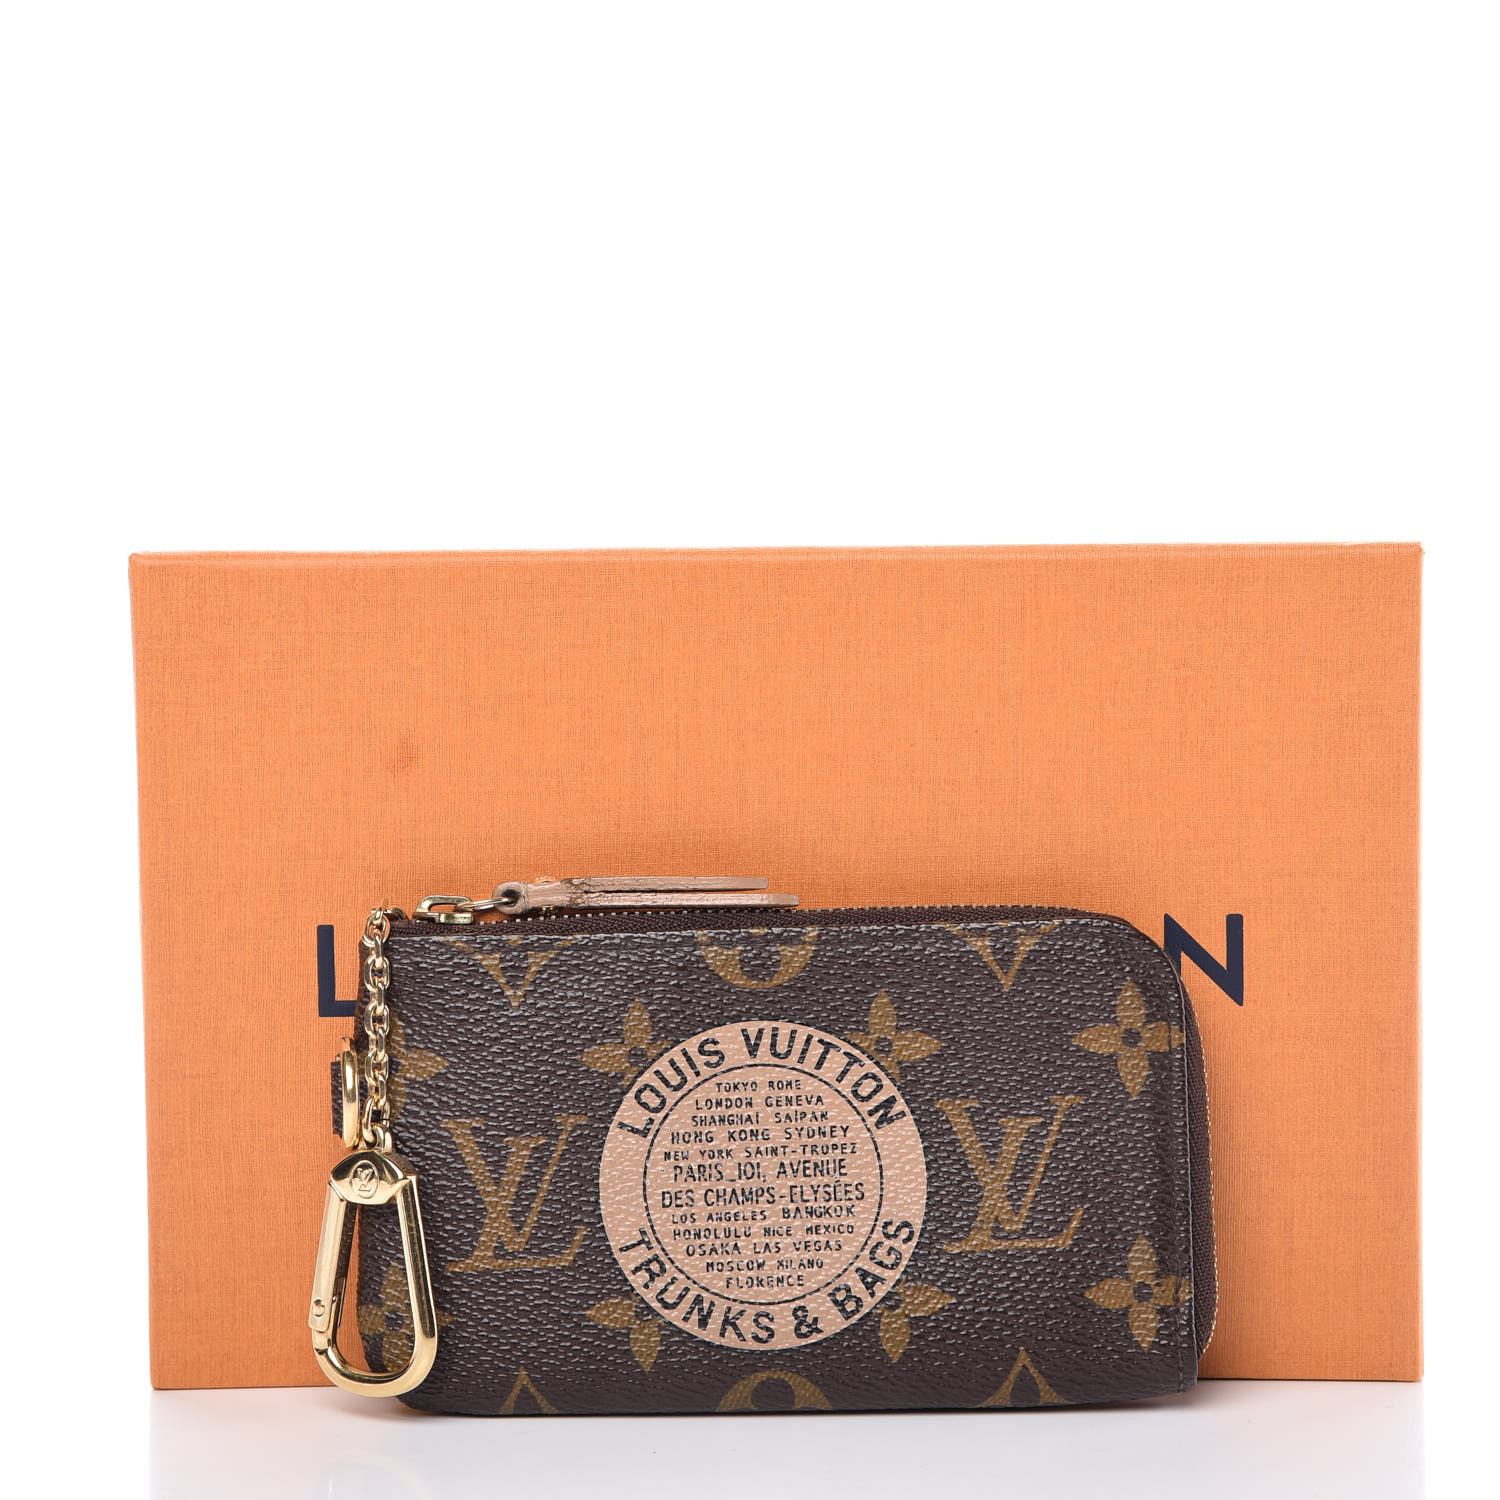 LOUIS VUITTON Monogram Complice Trunks and Bags Key Pouch 363990